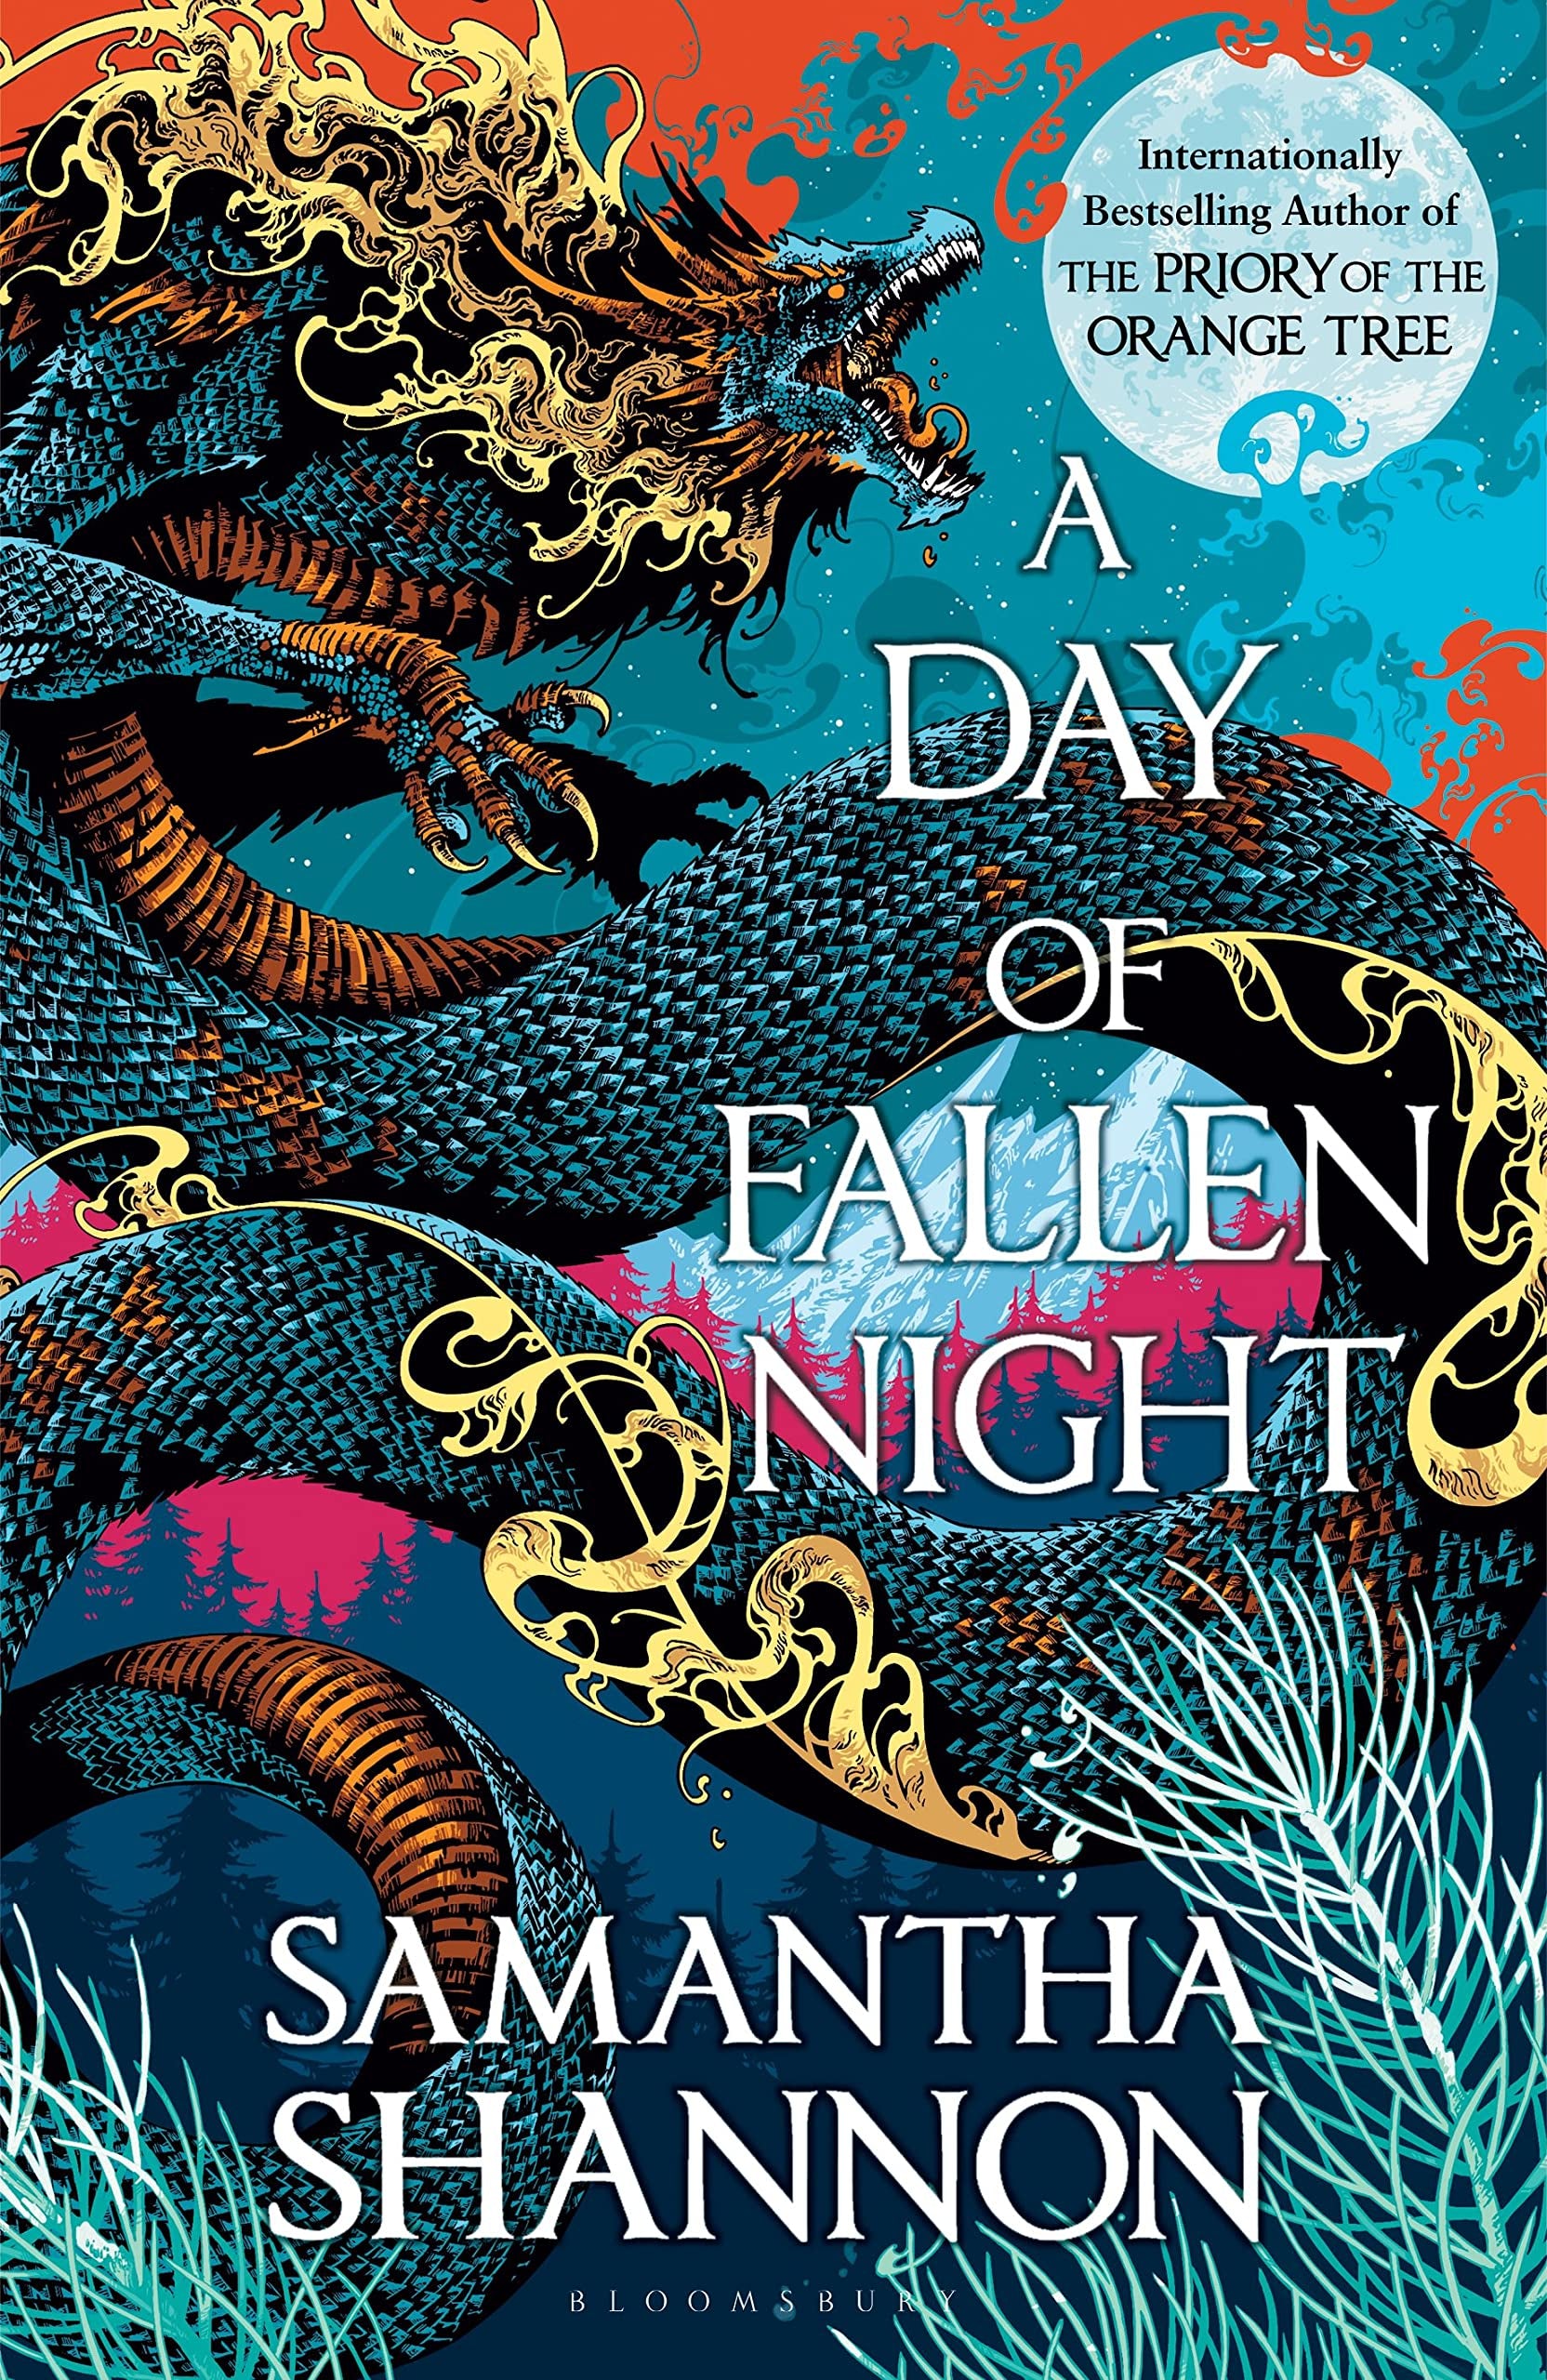 A Day of Fallen Night - by Samantha Shannon (Hardcover)